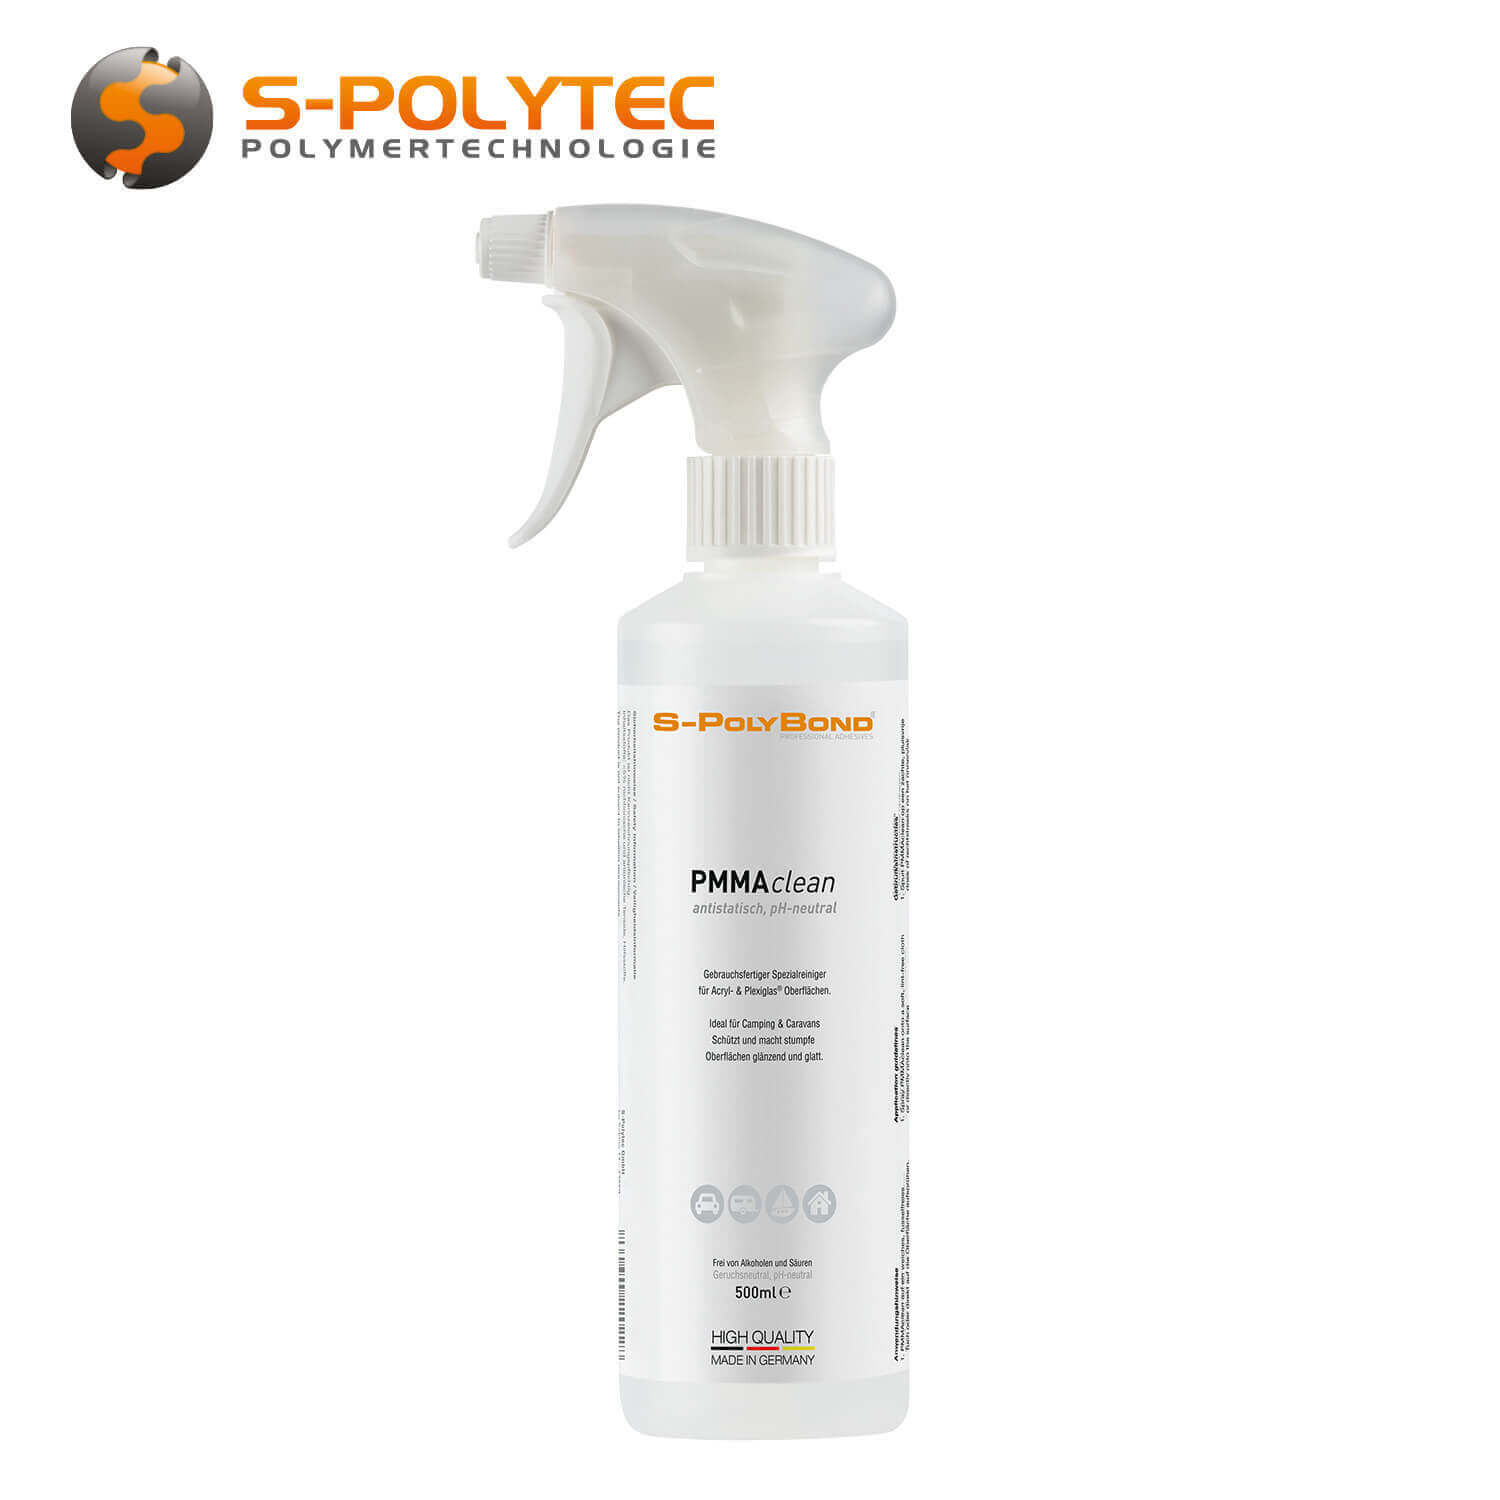 S-Polybond PMMAclean - special cleaner for acrylic and Plexiglas® in the reusable 500ml spray bottle